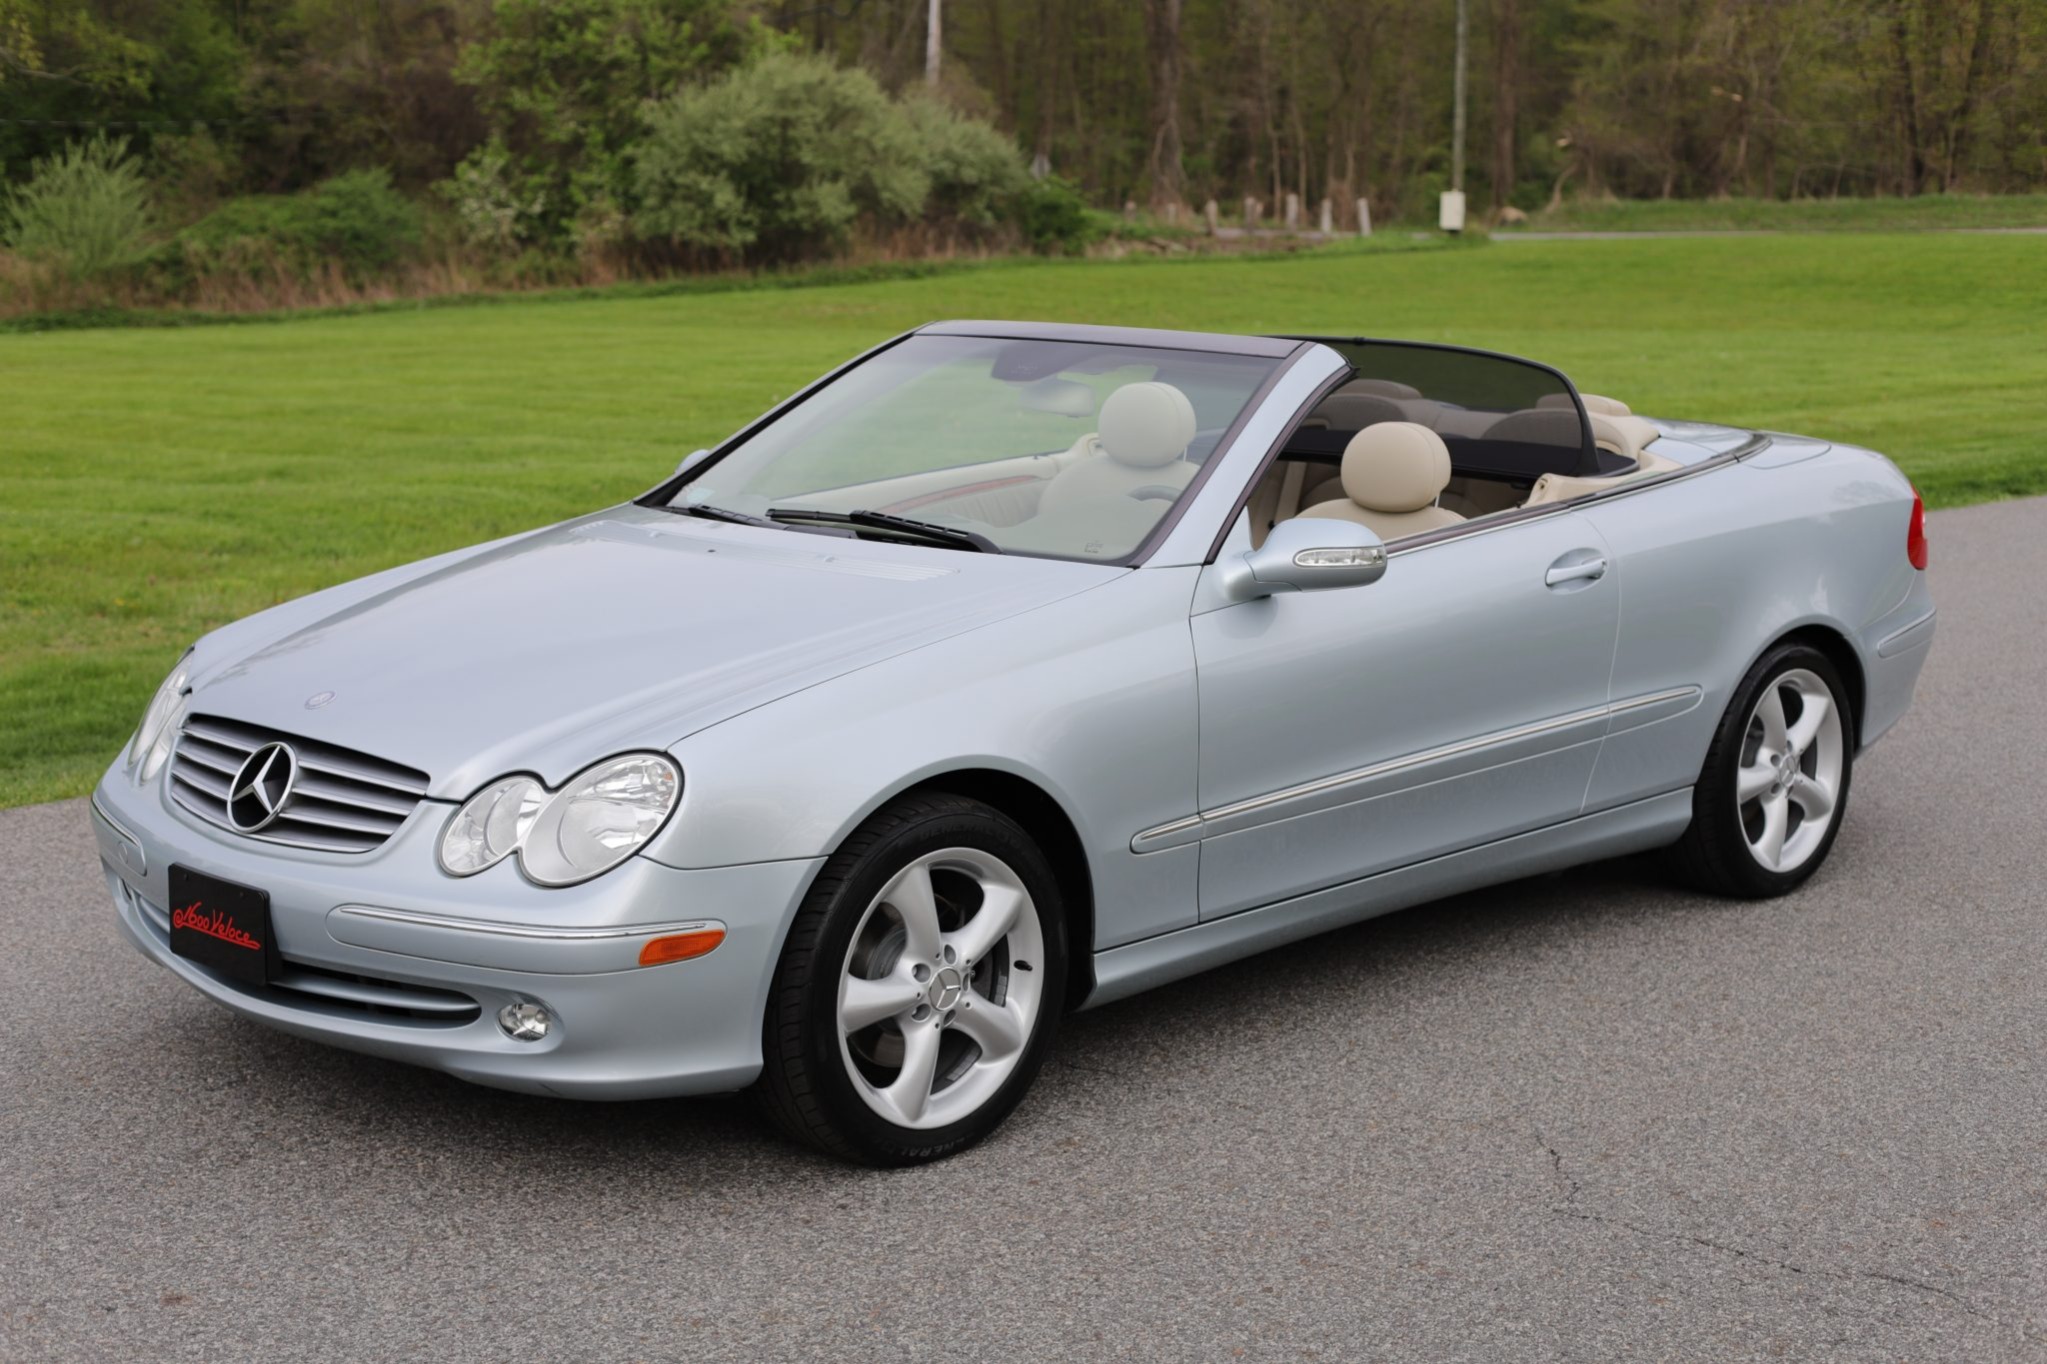 26k-Mile 2005 Mercedes-Benz CLK320 Cabriolet for sale on BaT Auctions -  sold for $17,000 on May 17, 2021 (Lot #48,044) | Bring a Trailer